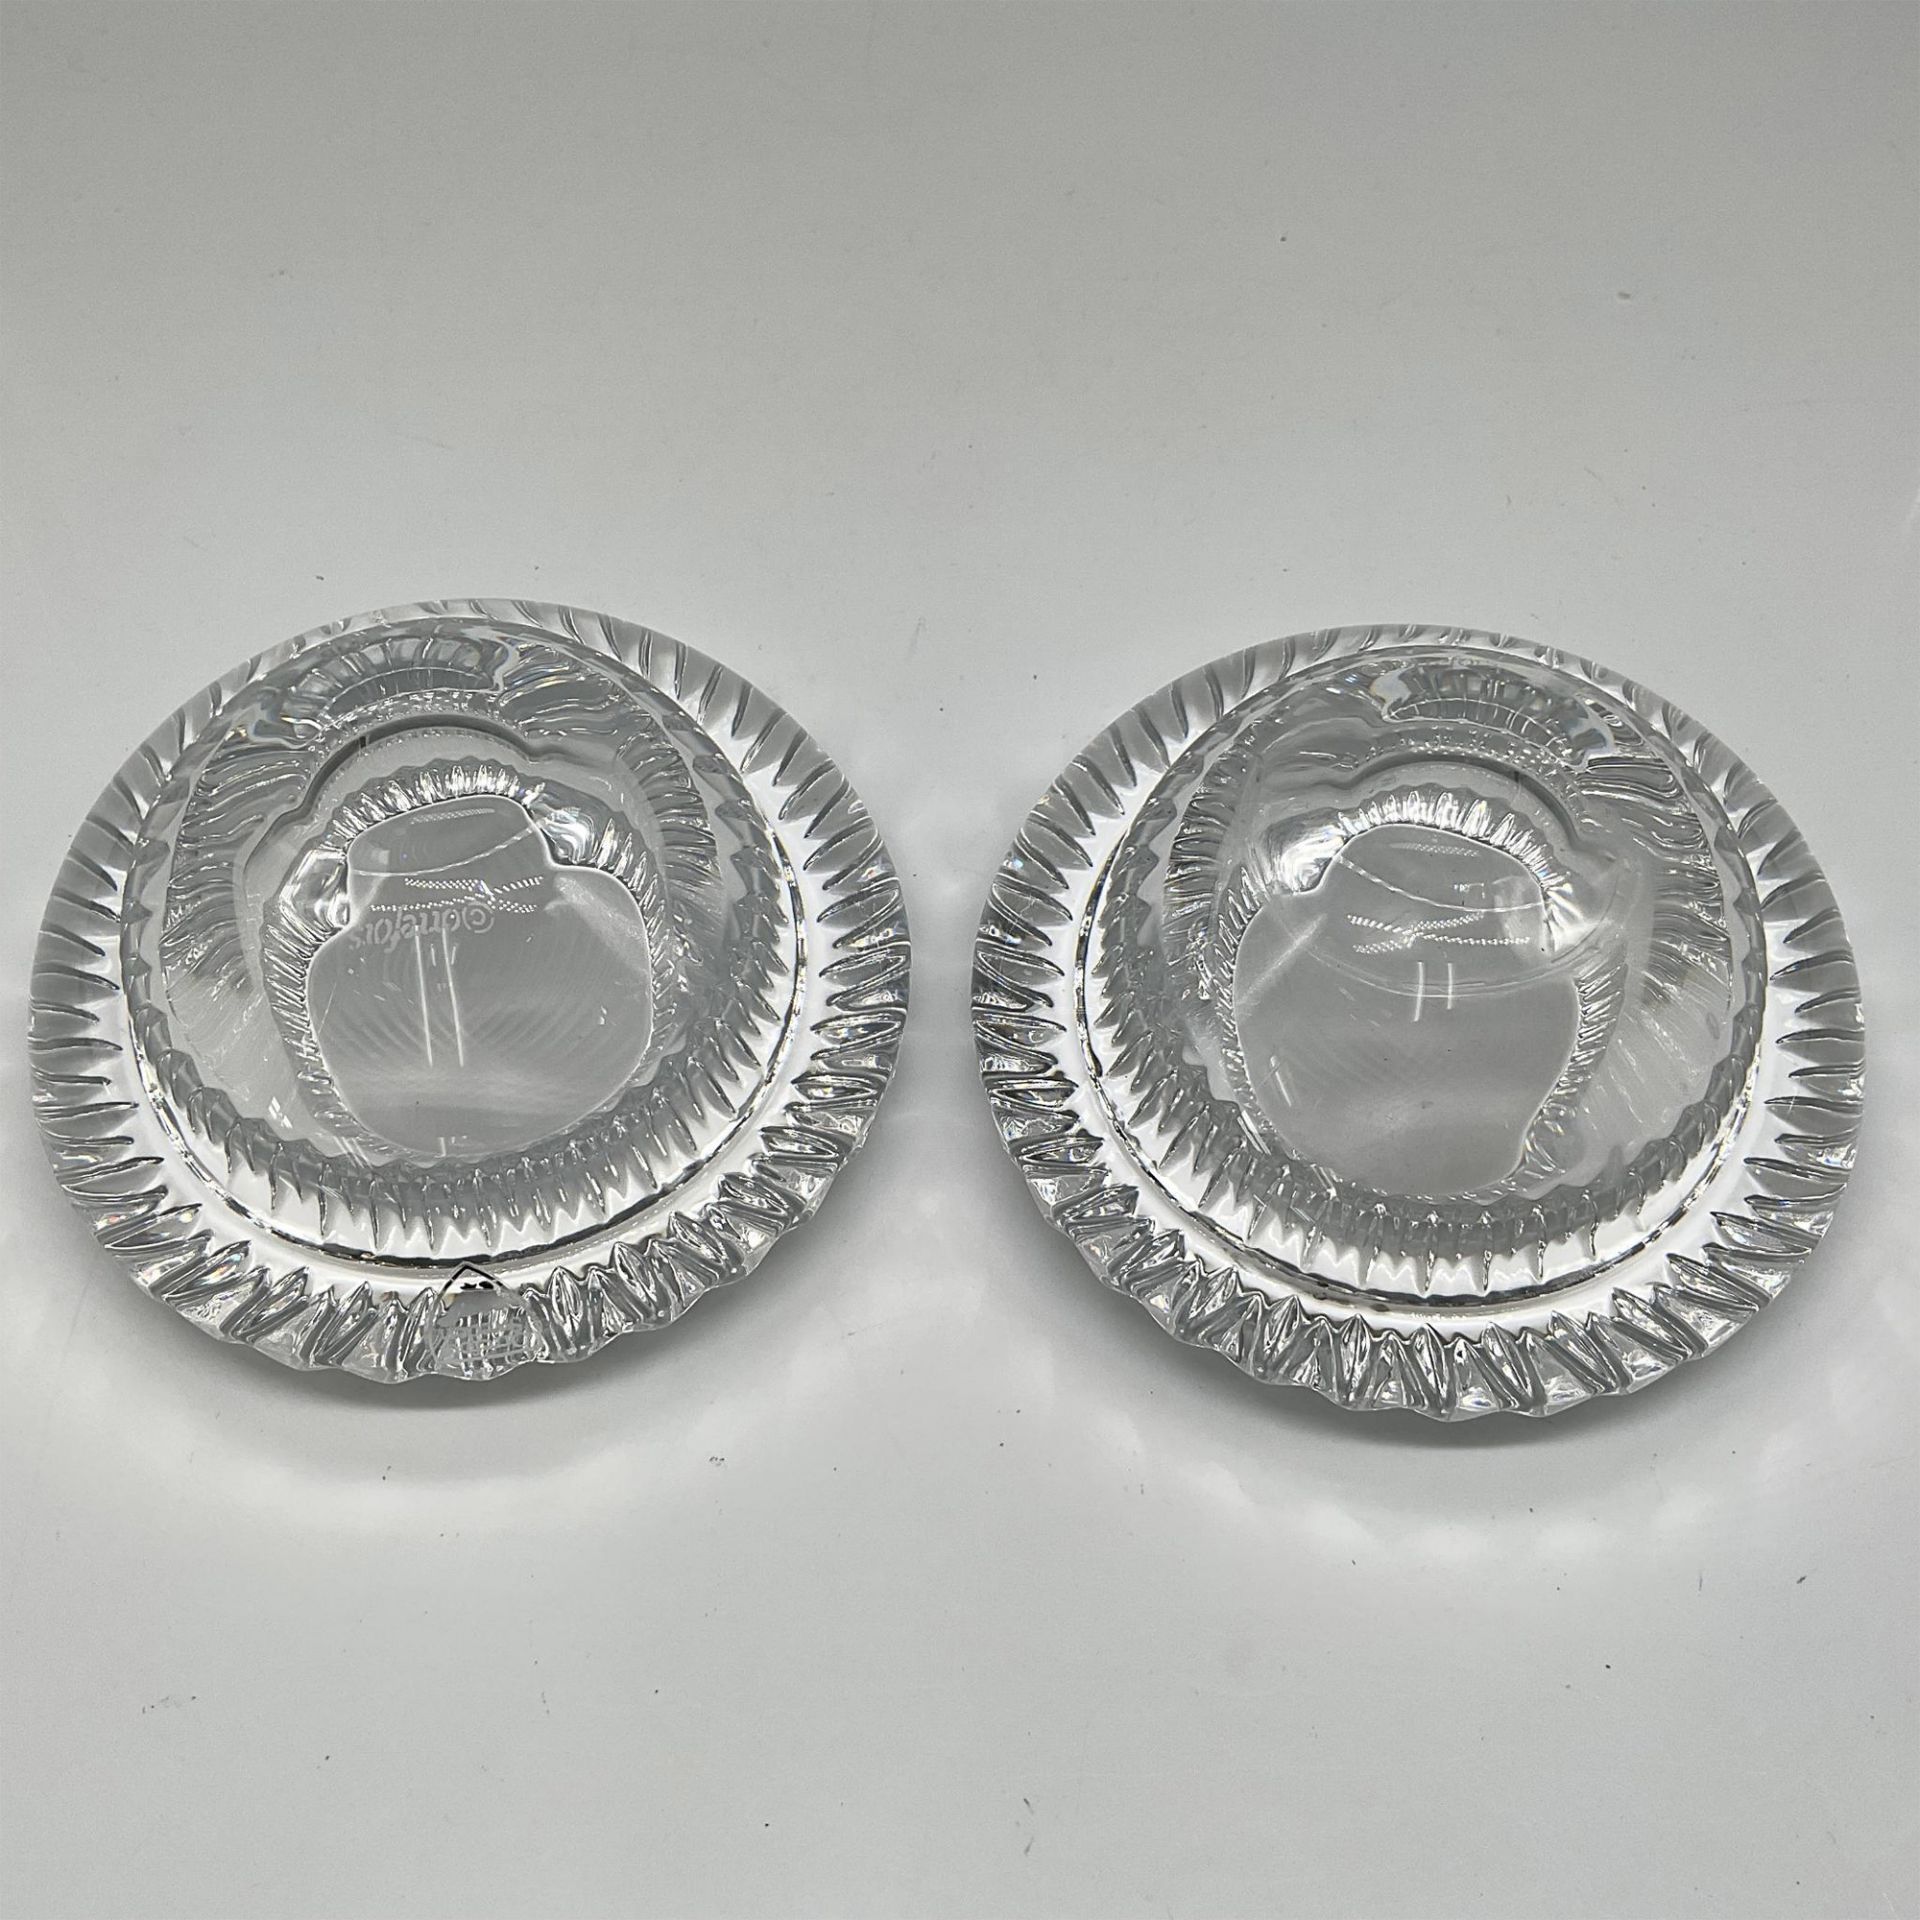 Pair of Orrefors Crystal Brilliance Votives - Image 3 of 4